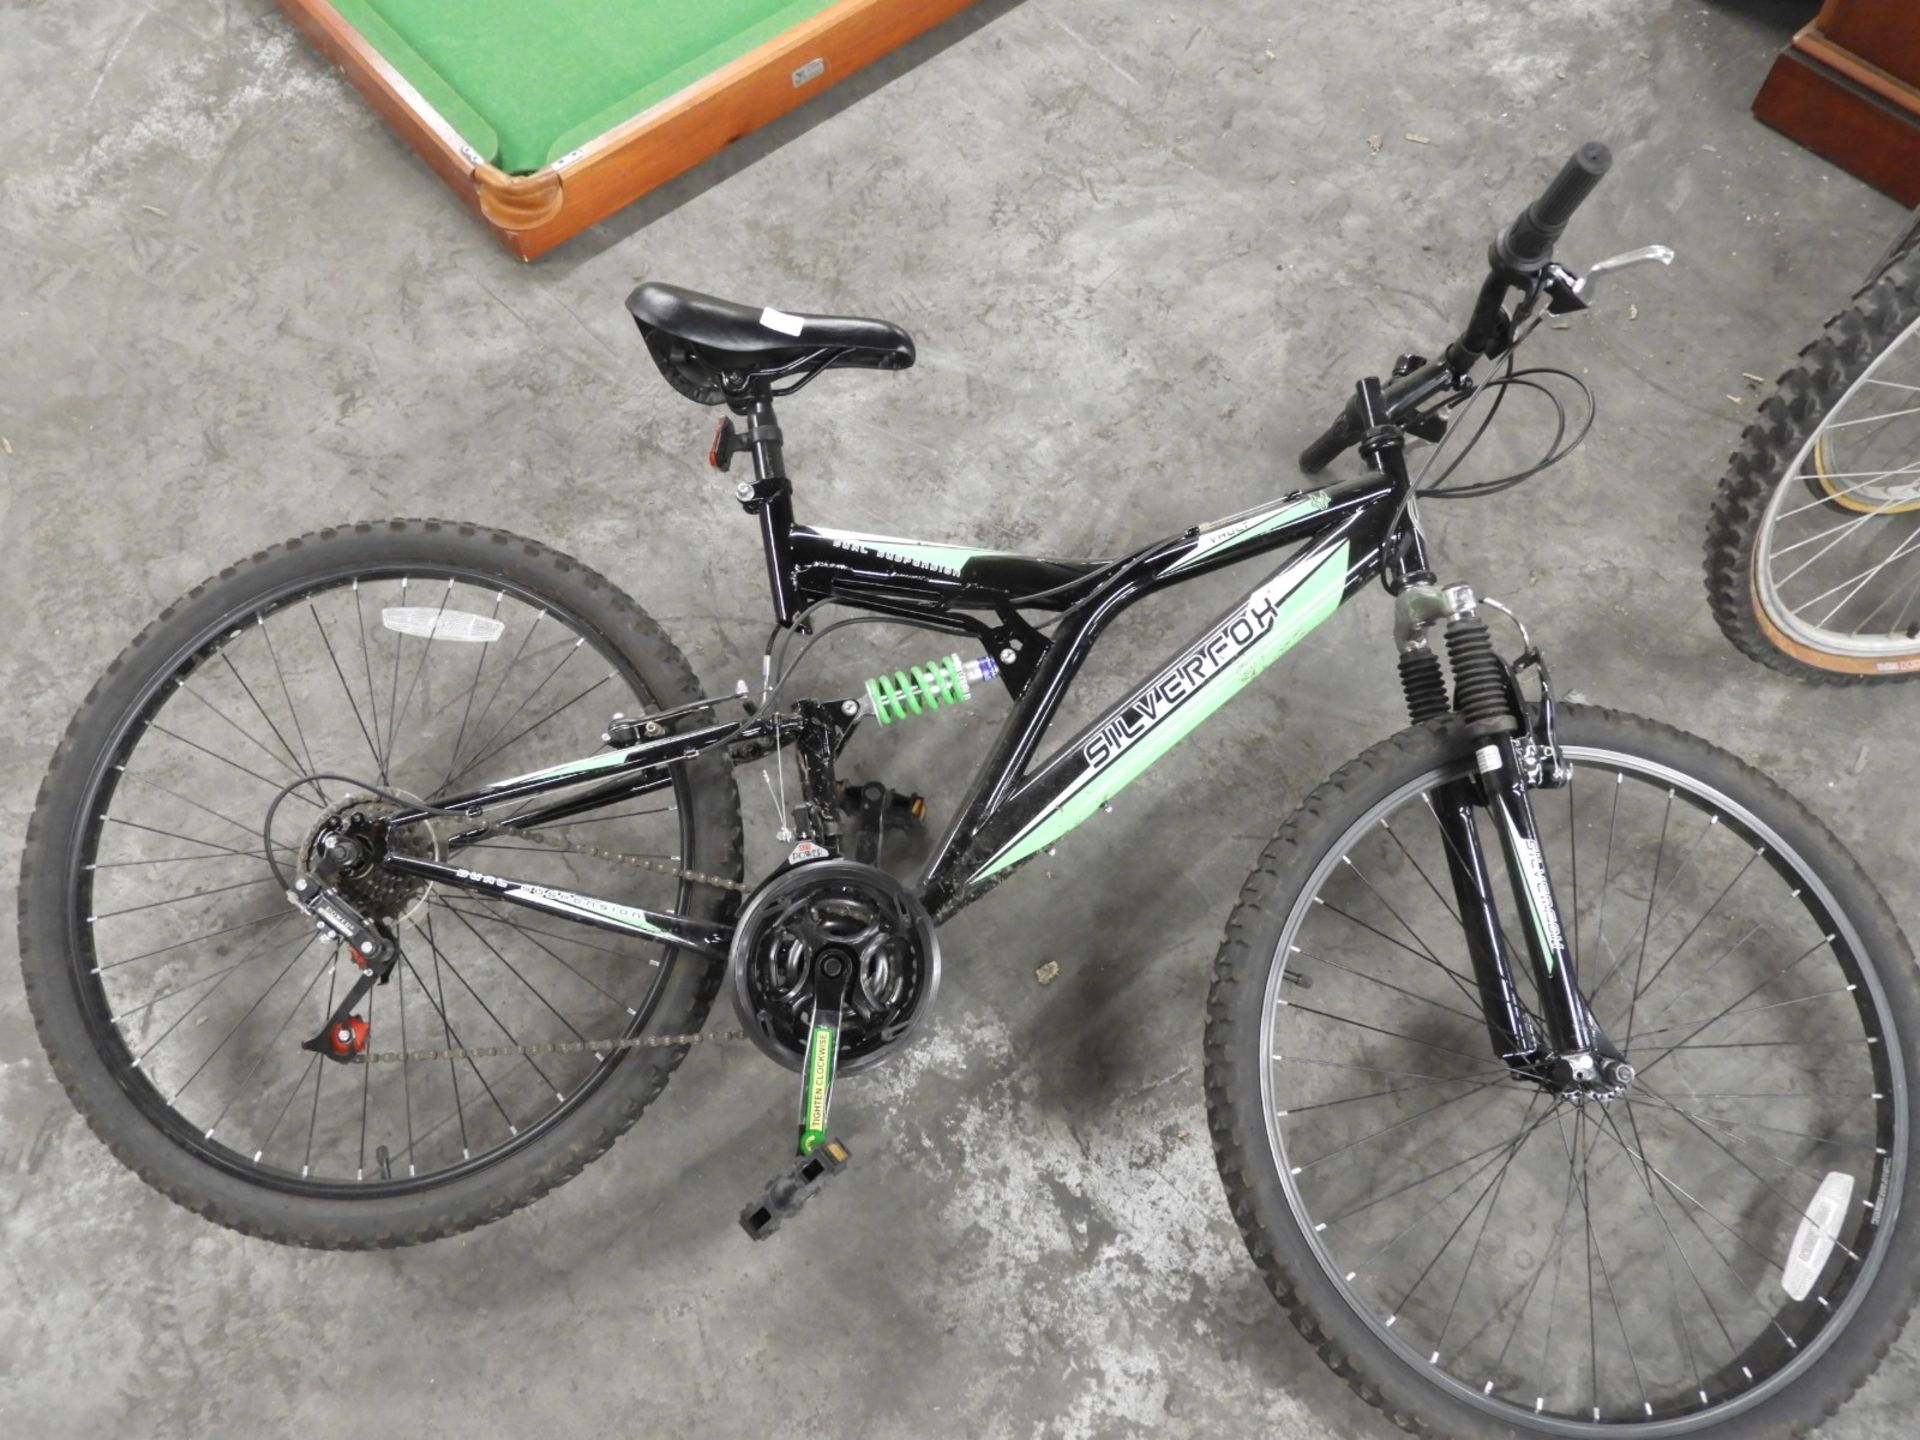 Silver Fox Gents Mountain Bike with Suspension